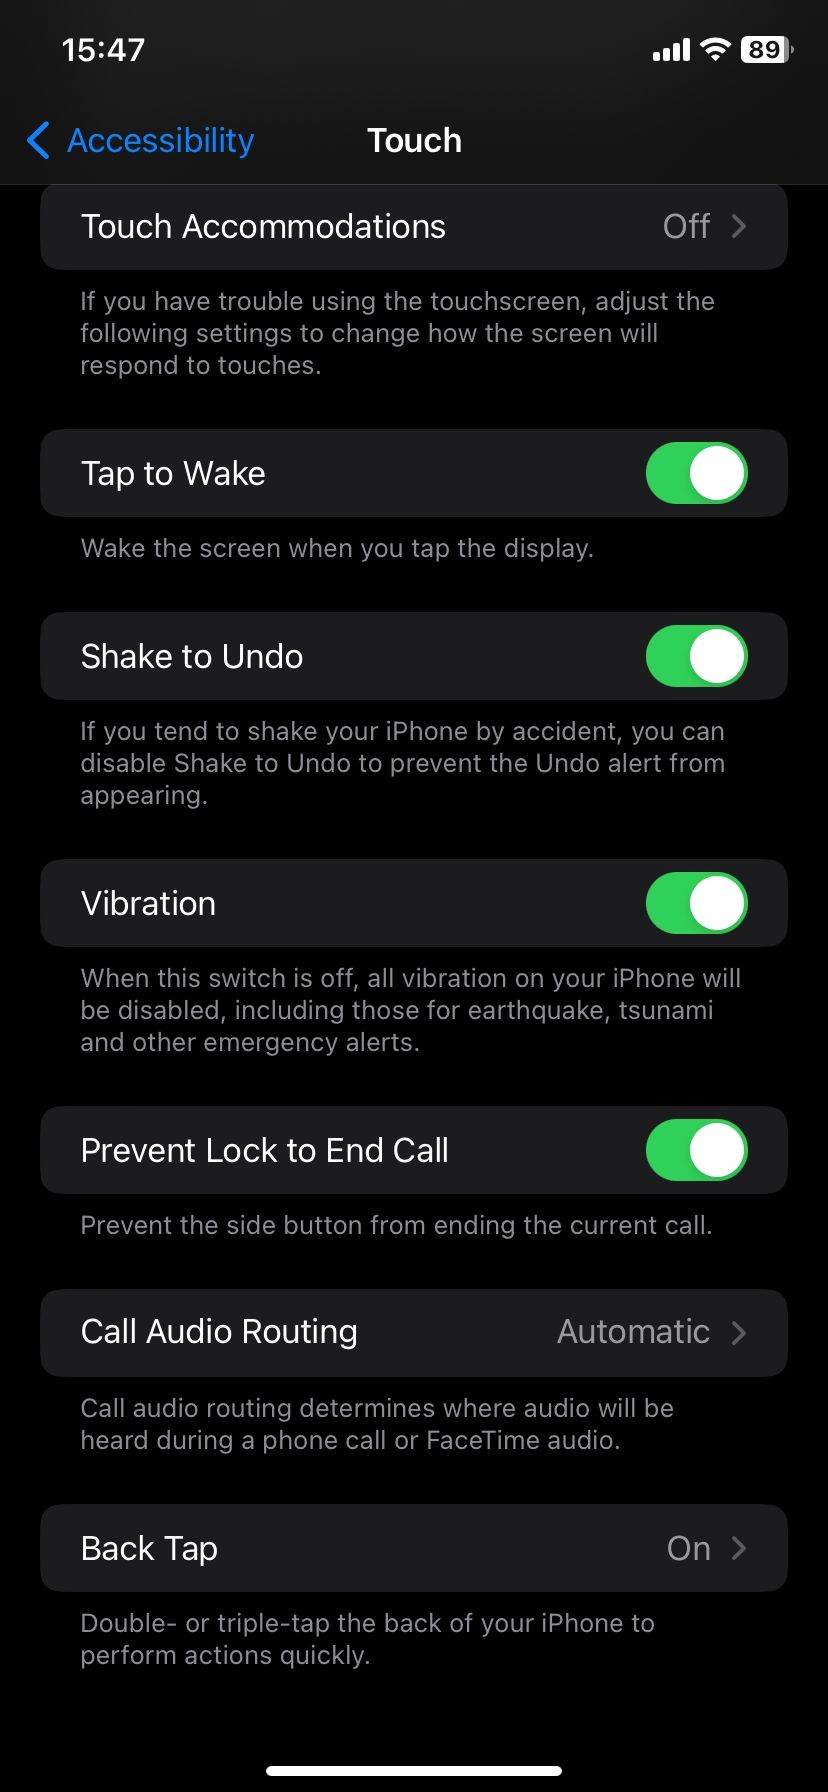 Preventing side button from ending calls on iPhone